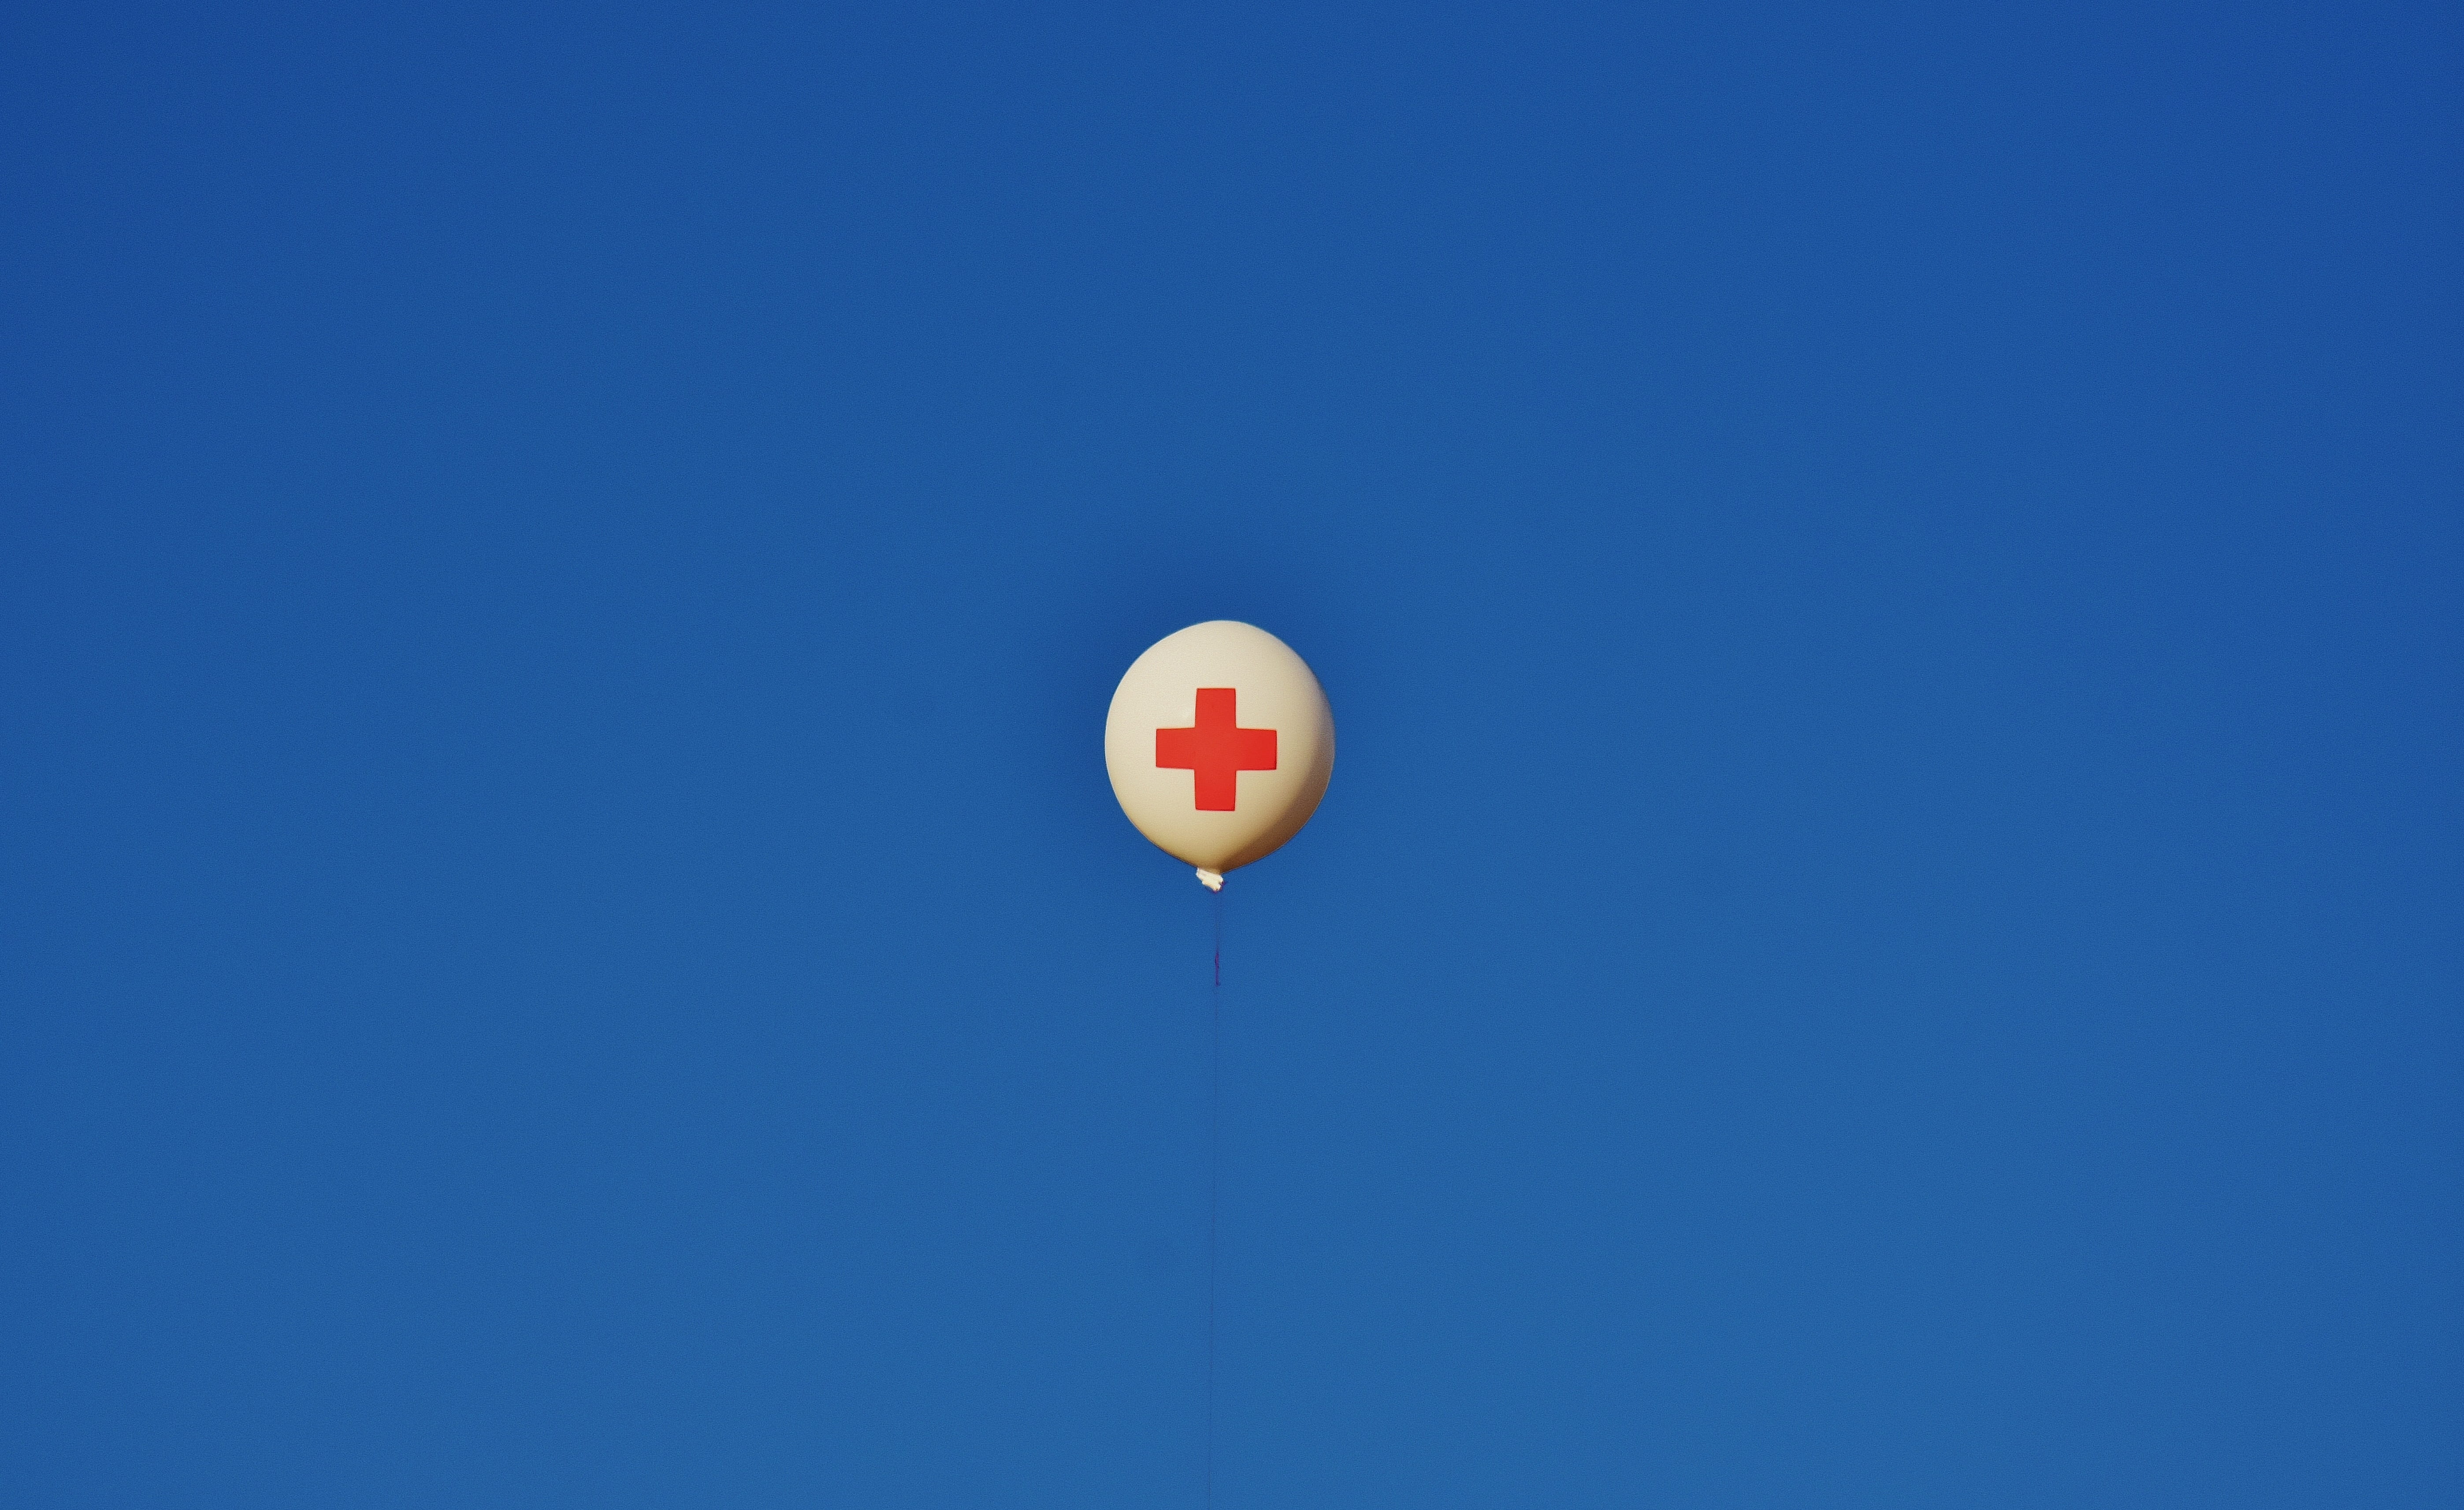 Balloon, First Aid, Help, sky, lifeboat station, directory